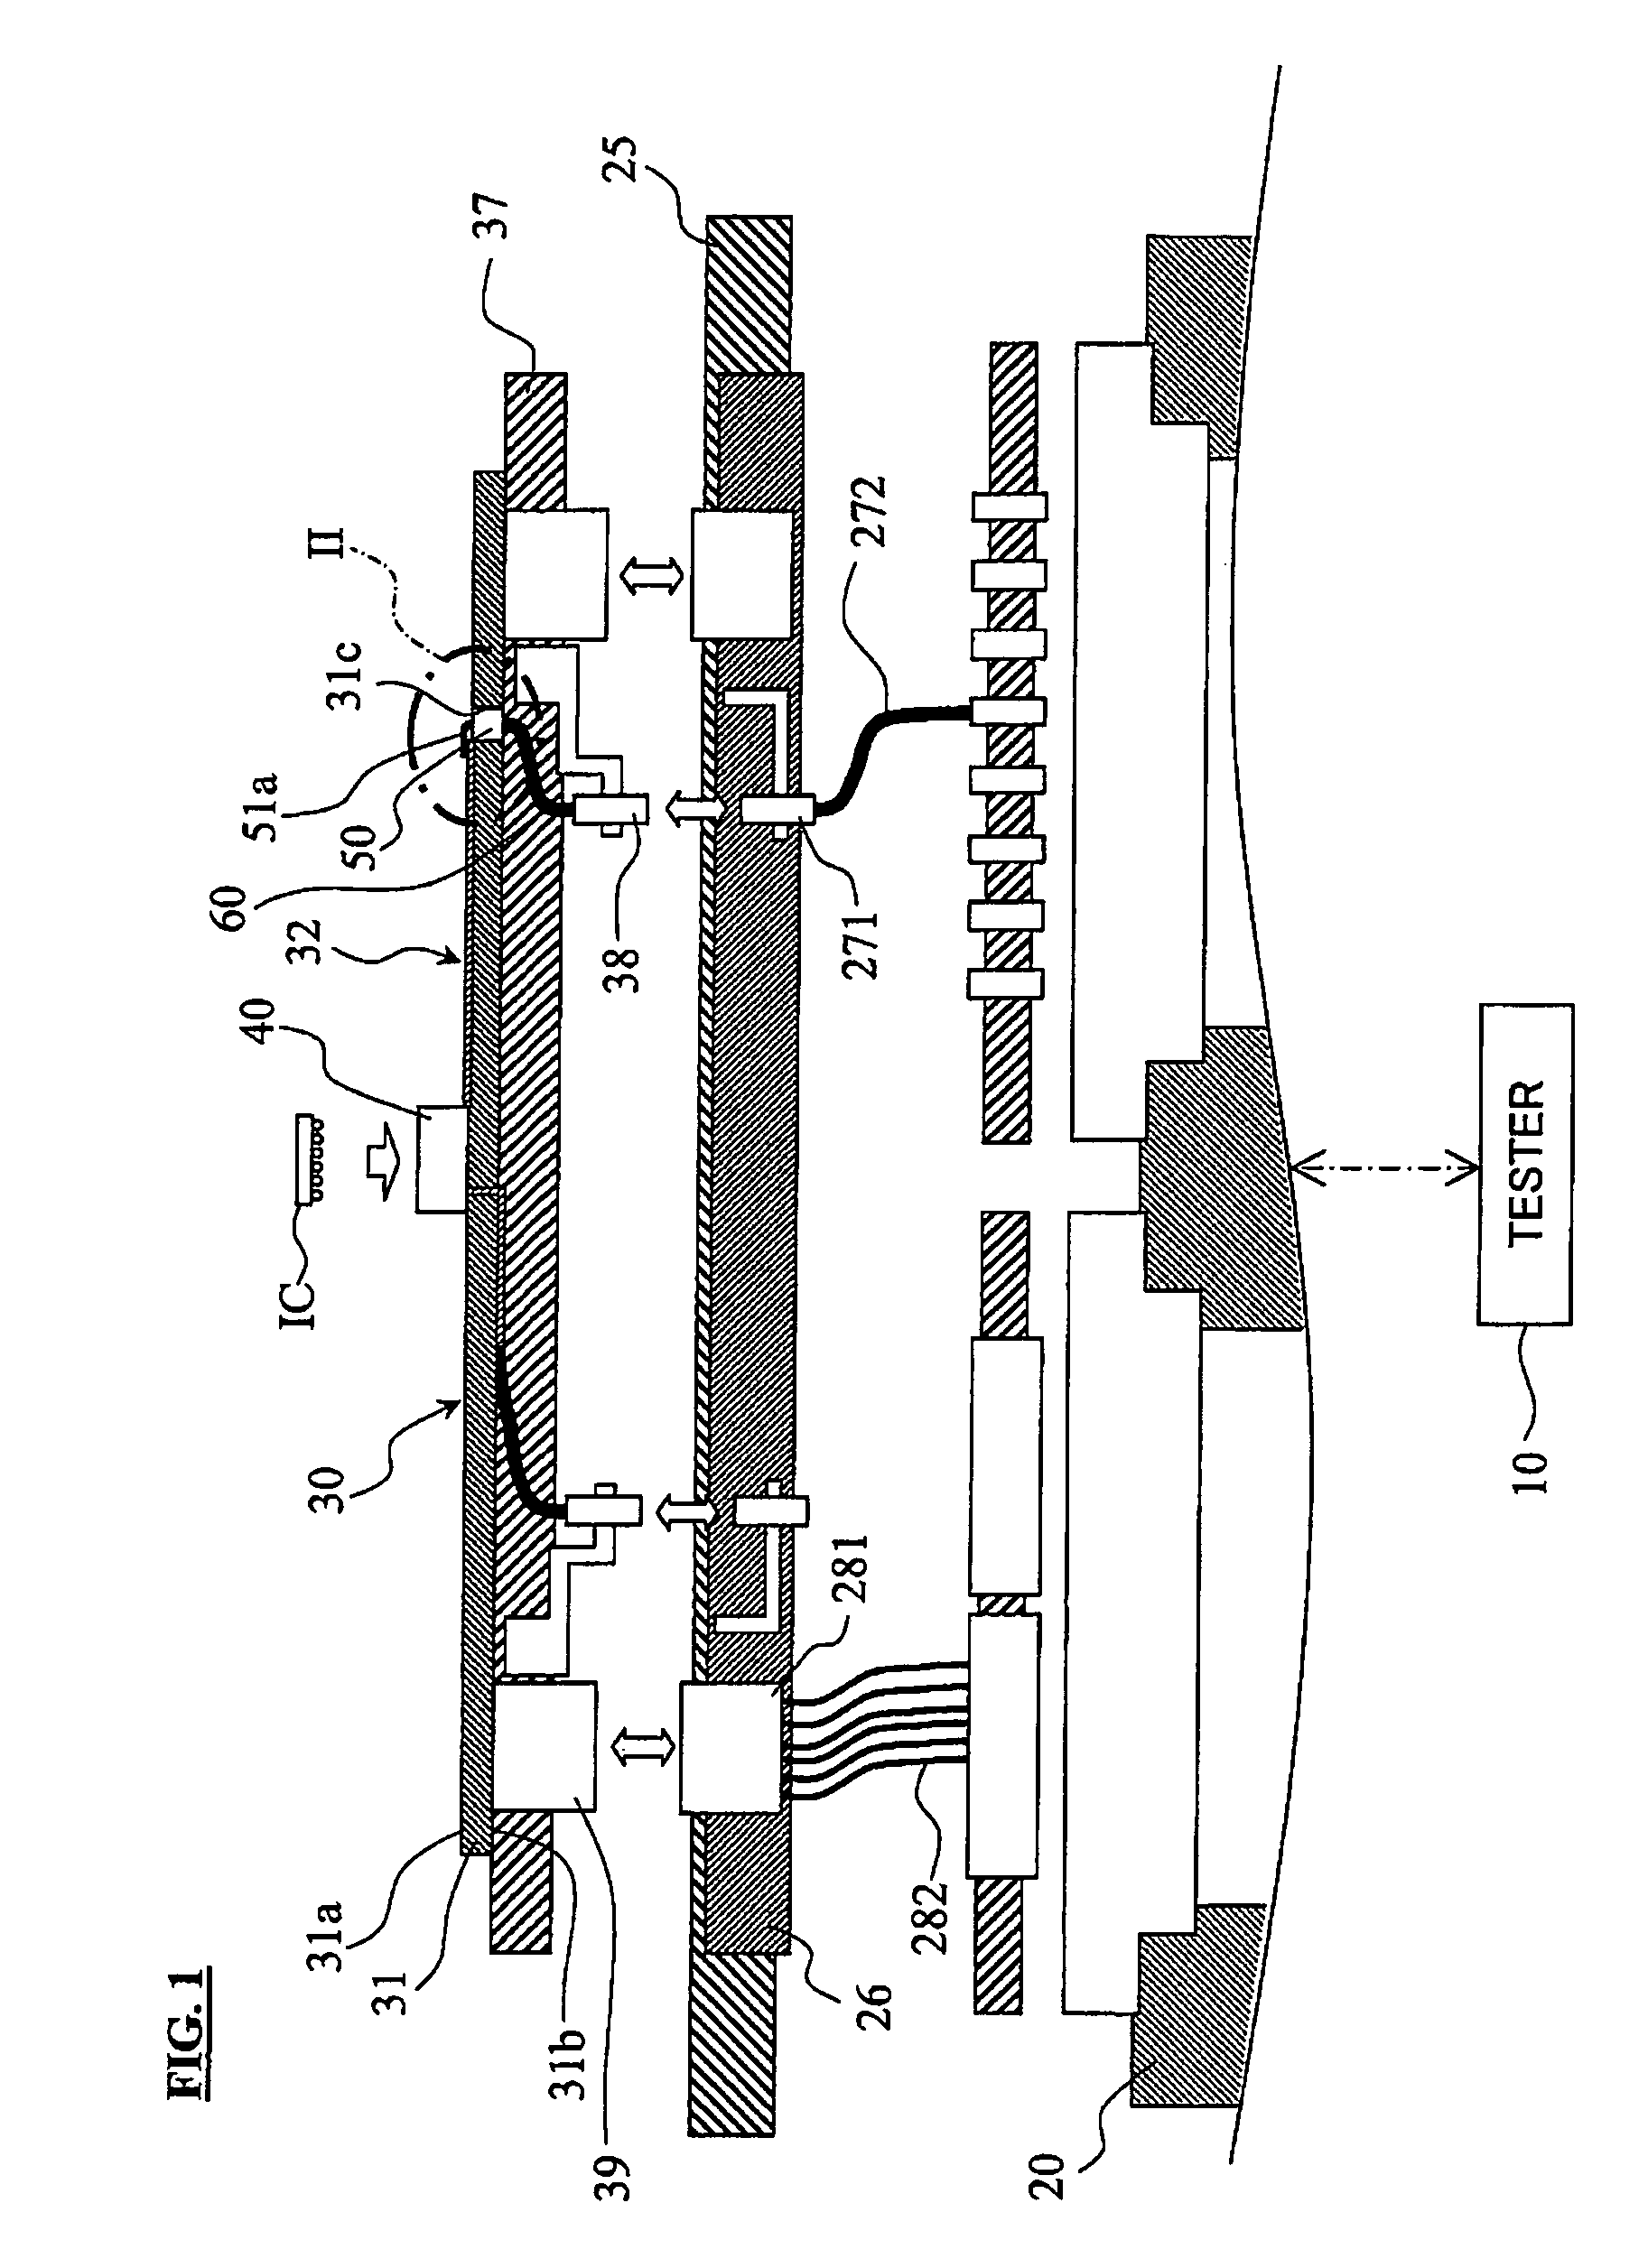 Measurement board for electronic device test apparatus